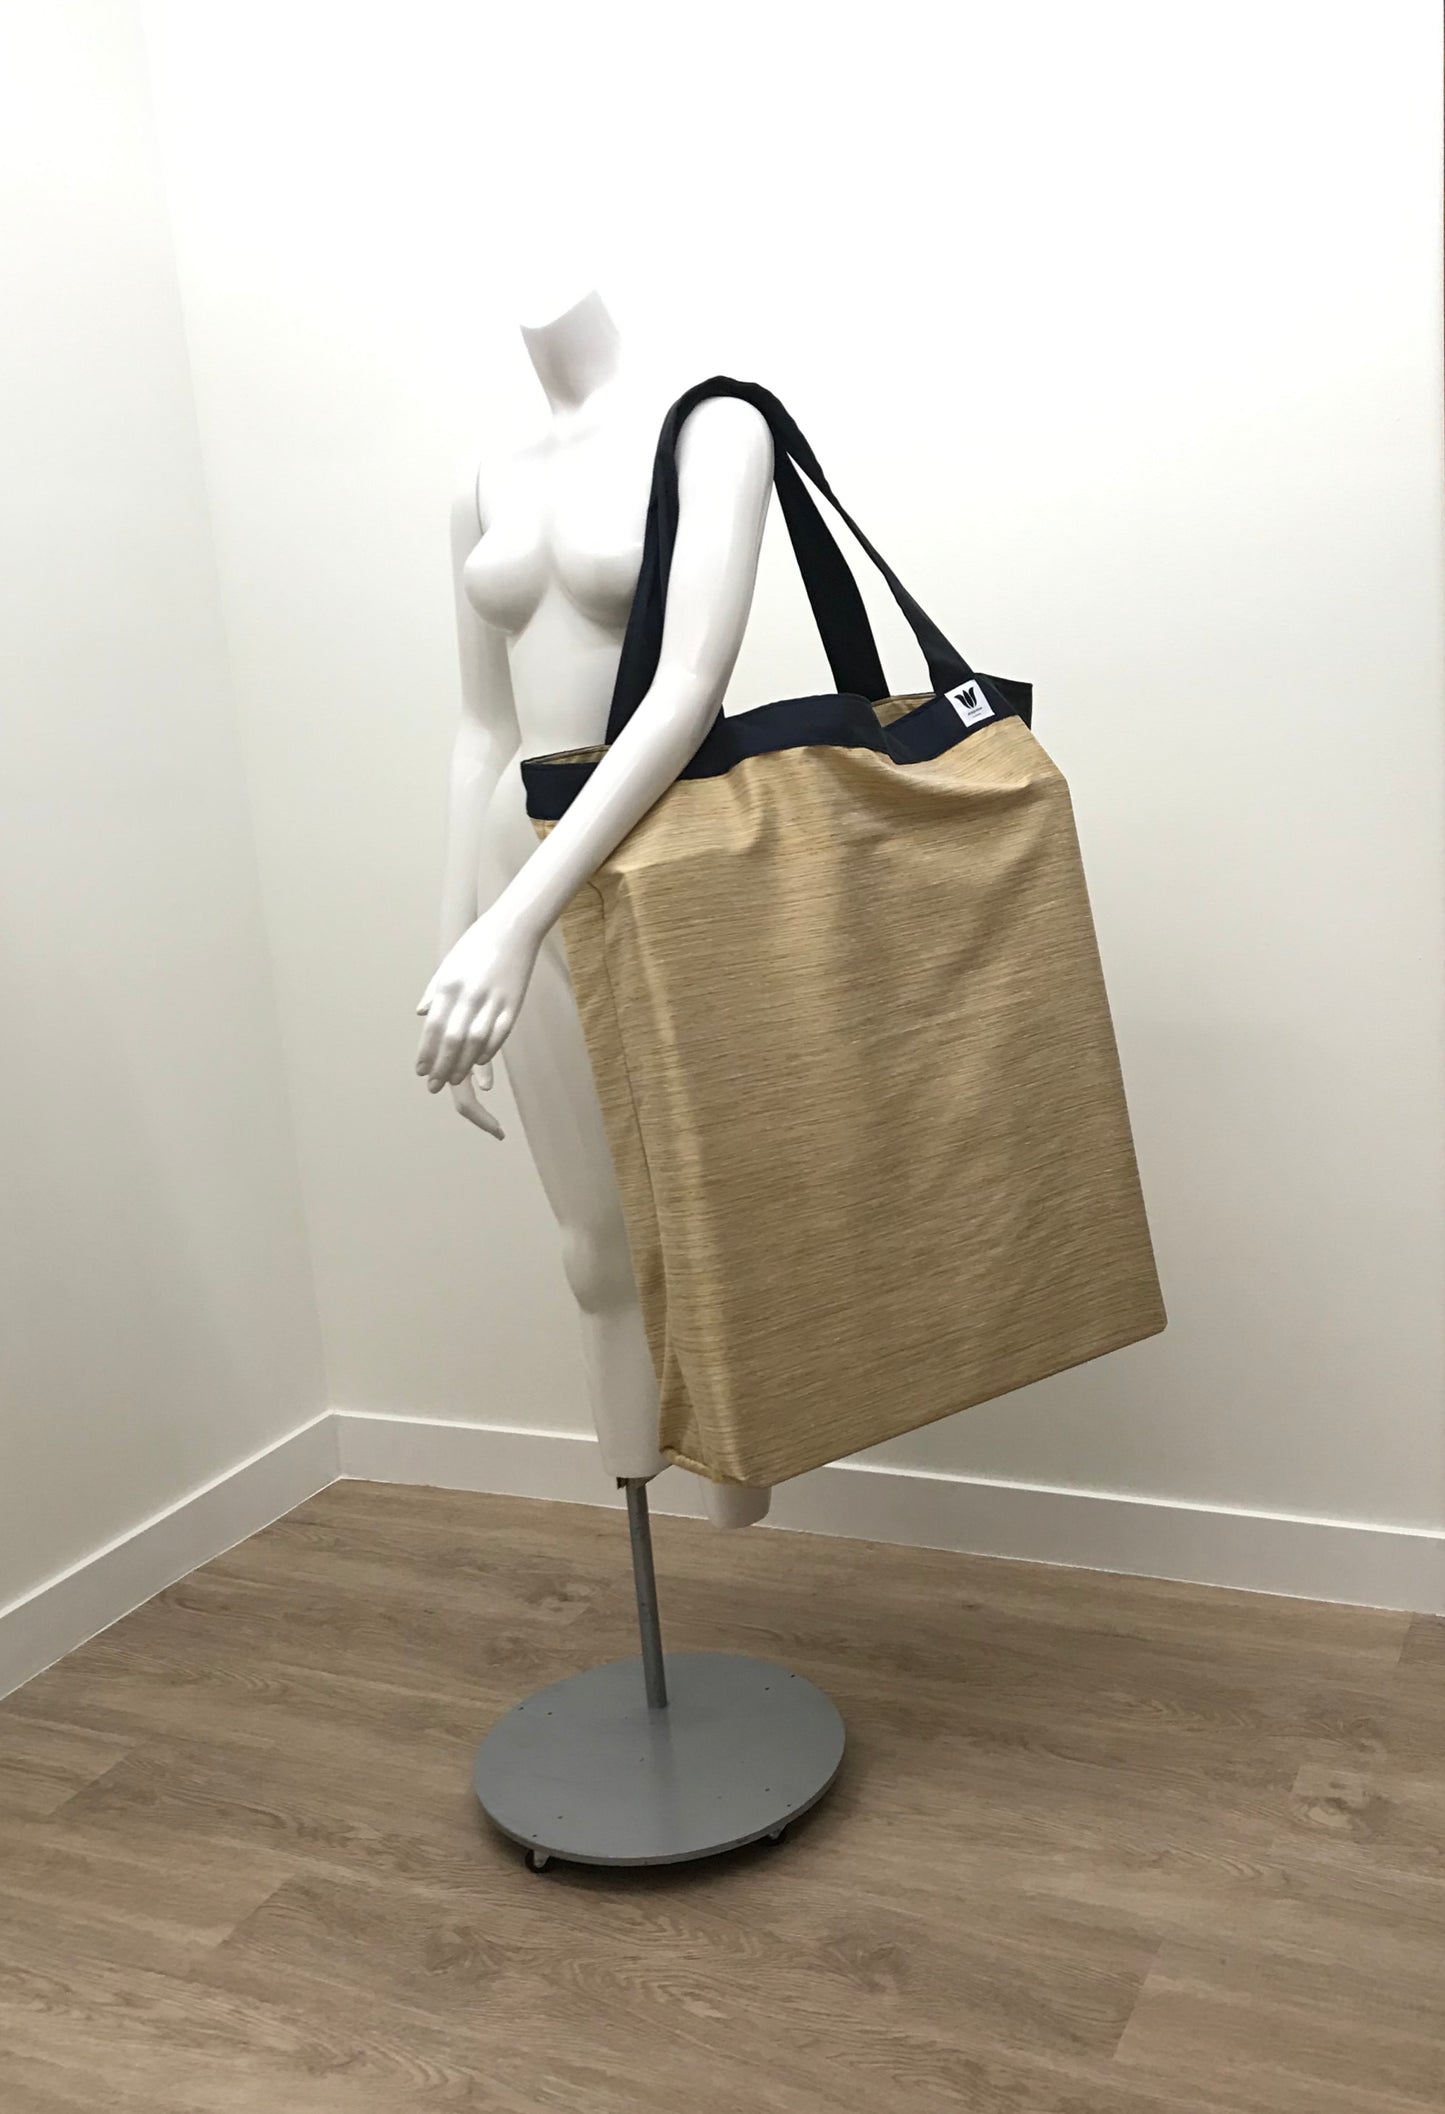 Extra Large Yoga Tote Bag in yellow gold stripe subtle fabric to carry and or store yoga props for yoga practice. Made in Canada by My Yoga Room Elements